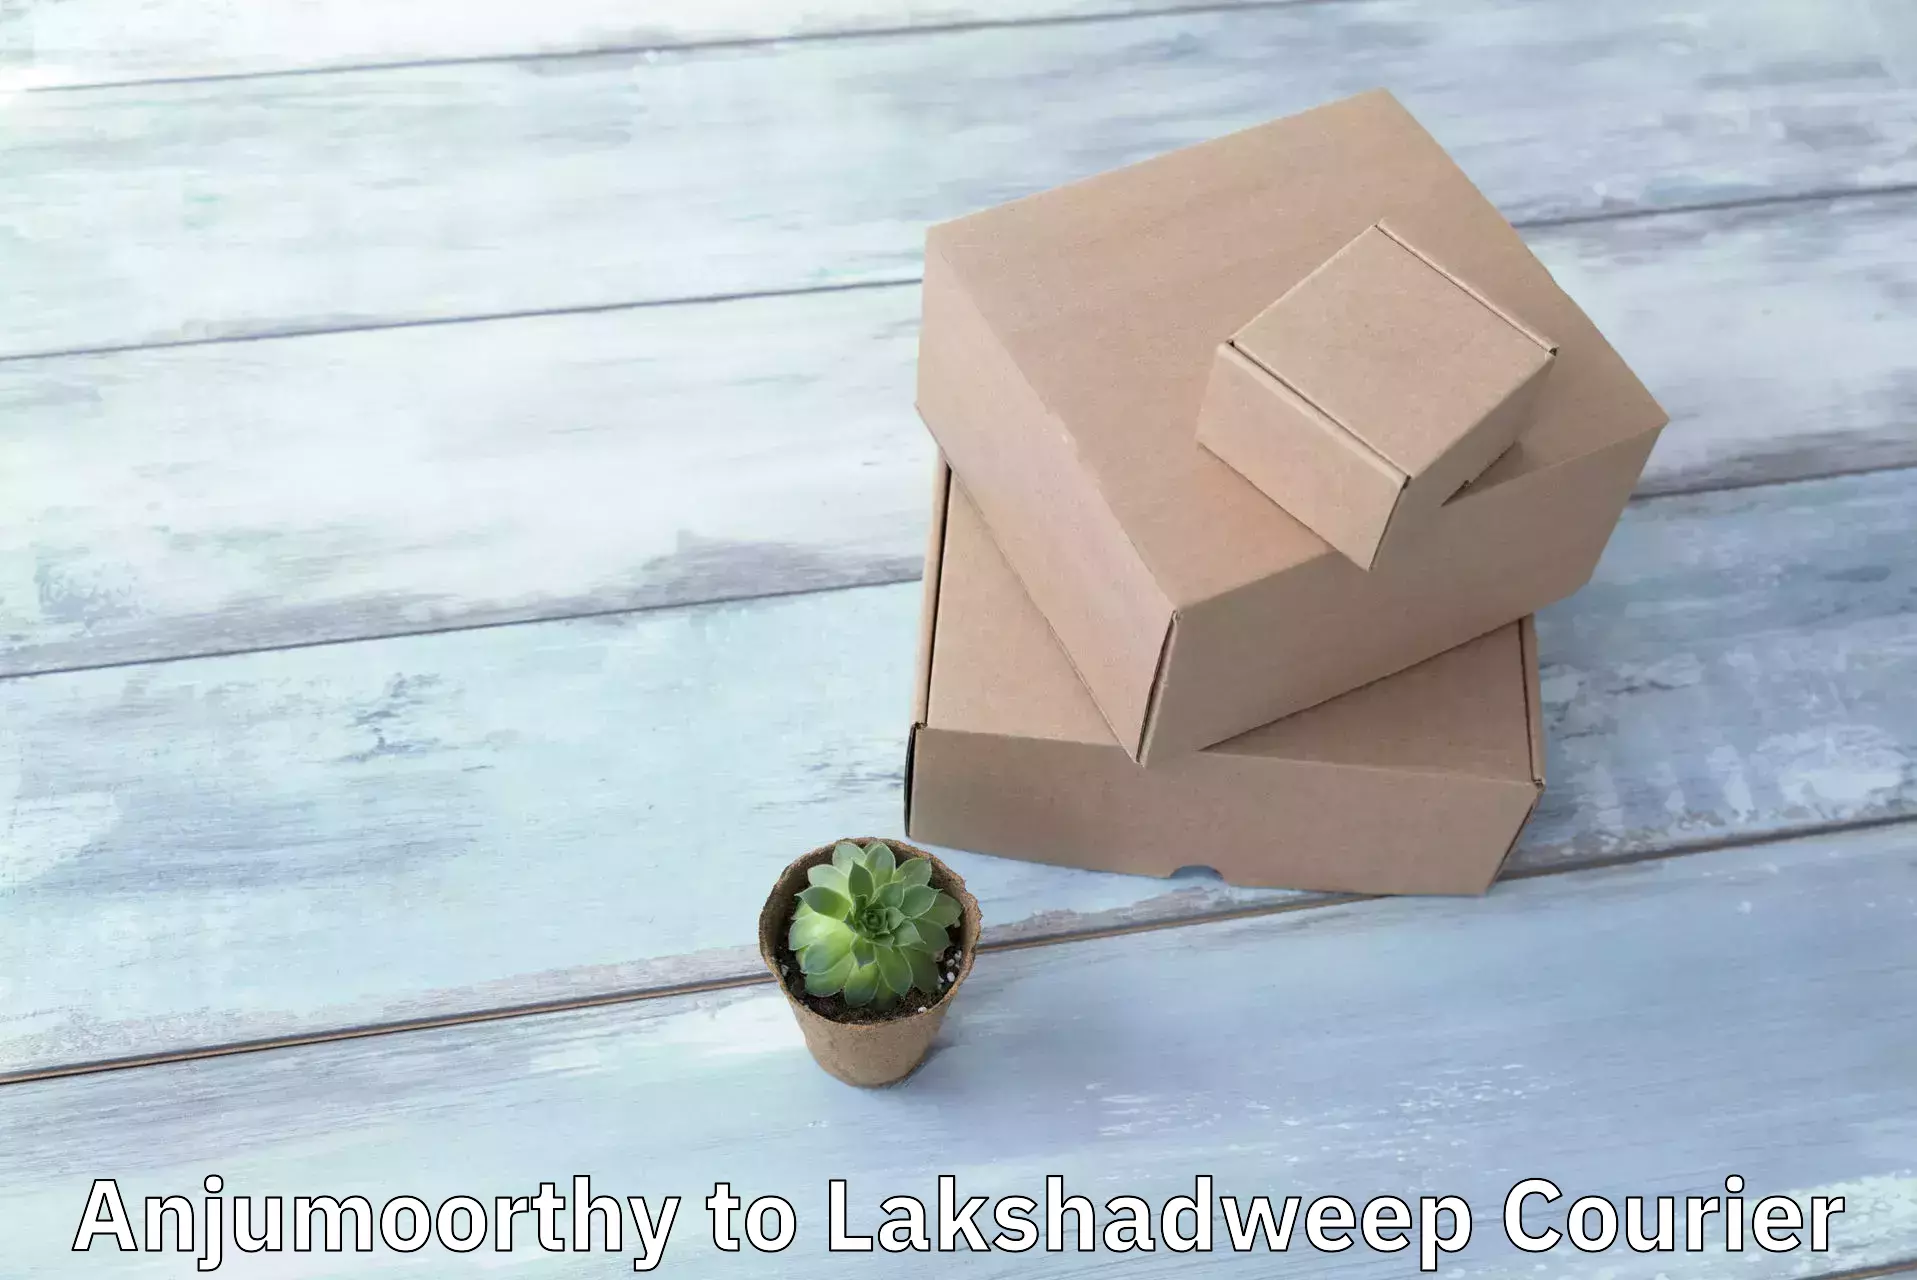 Easy access courier services Anjumoorthy to Lakshadweep